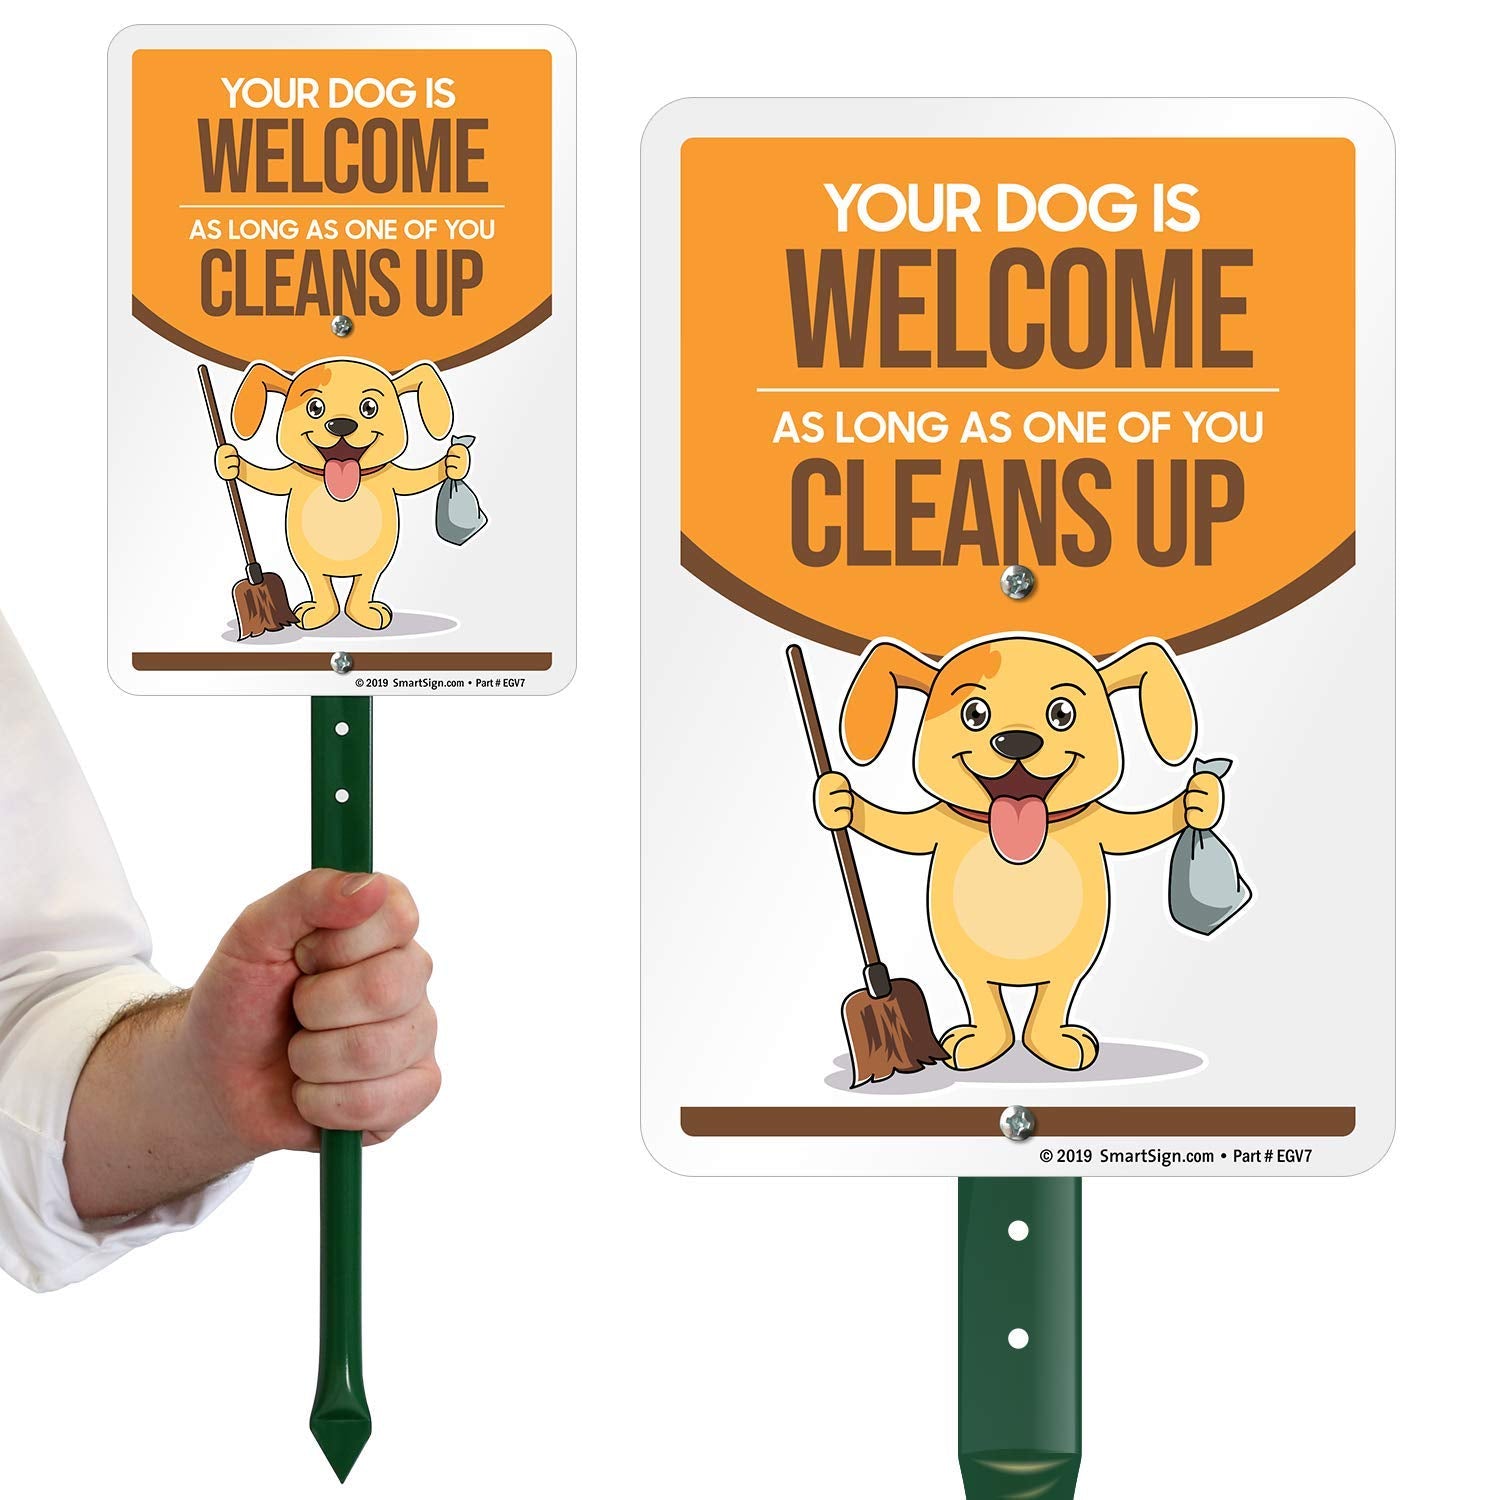 SmartSign, Smartsign Funny Dog Poop Sign for Yard, Your Dog Is Welcome as Long as One of You Cleans up Sign for Lawn | 21” Tall Stake & Sign Kit